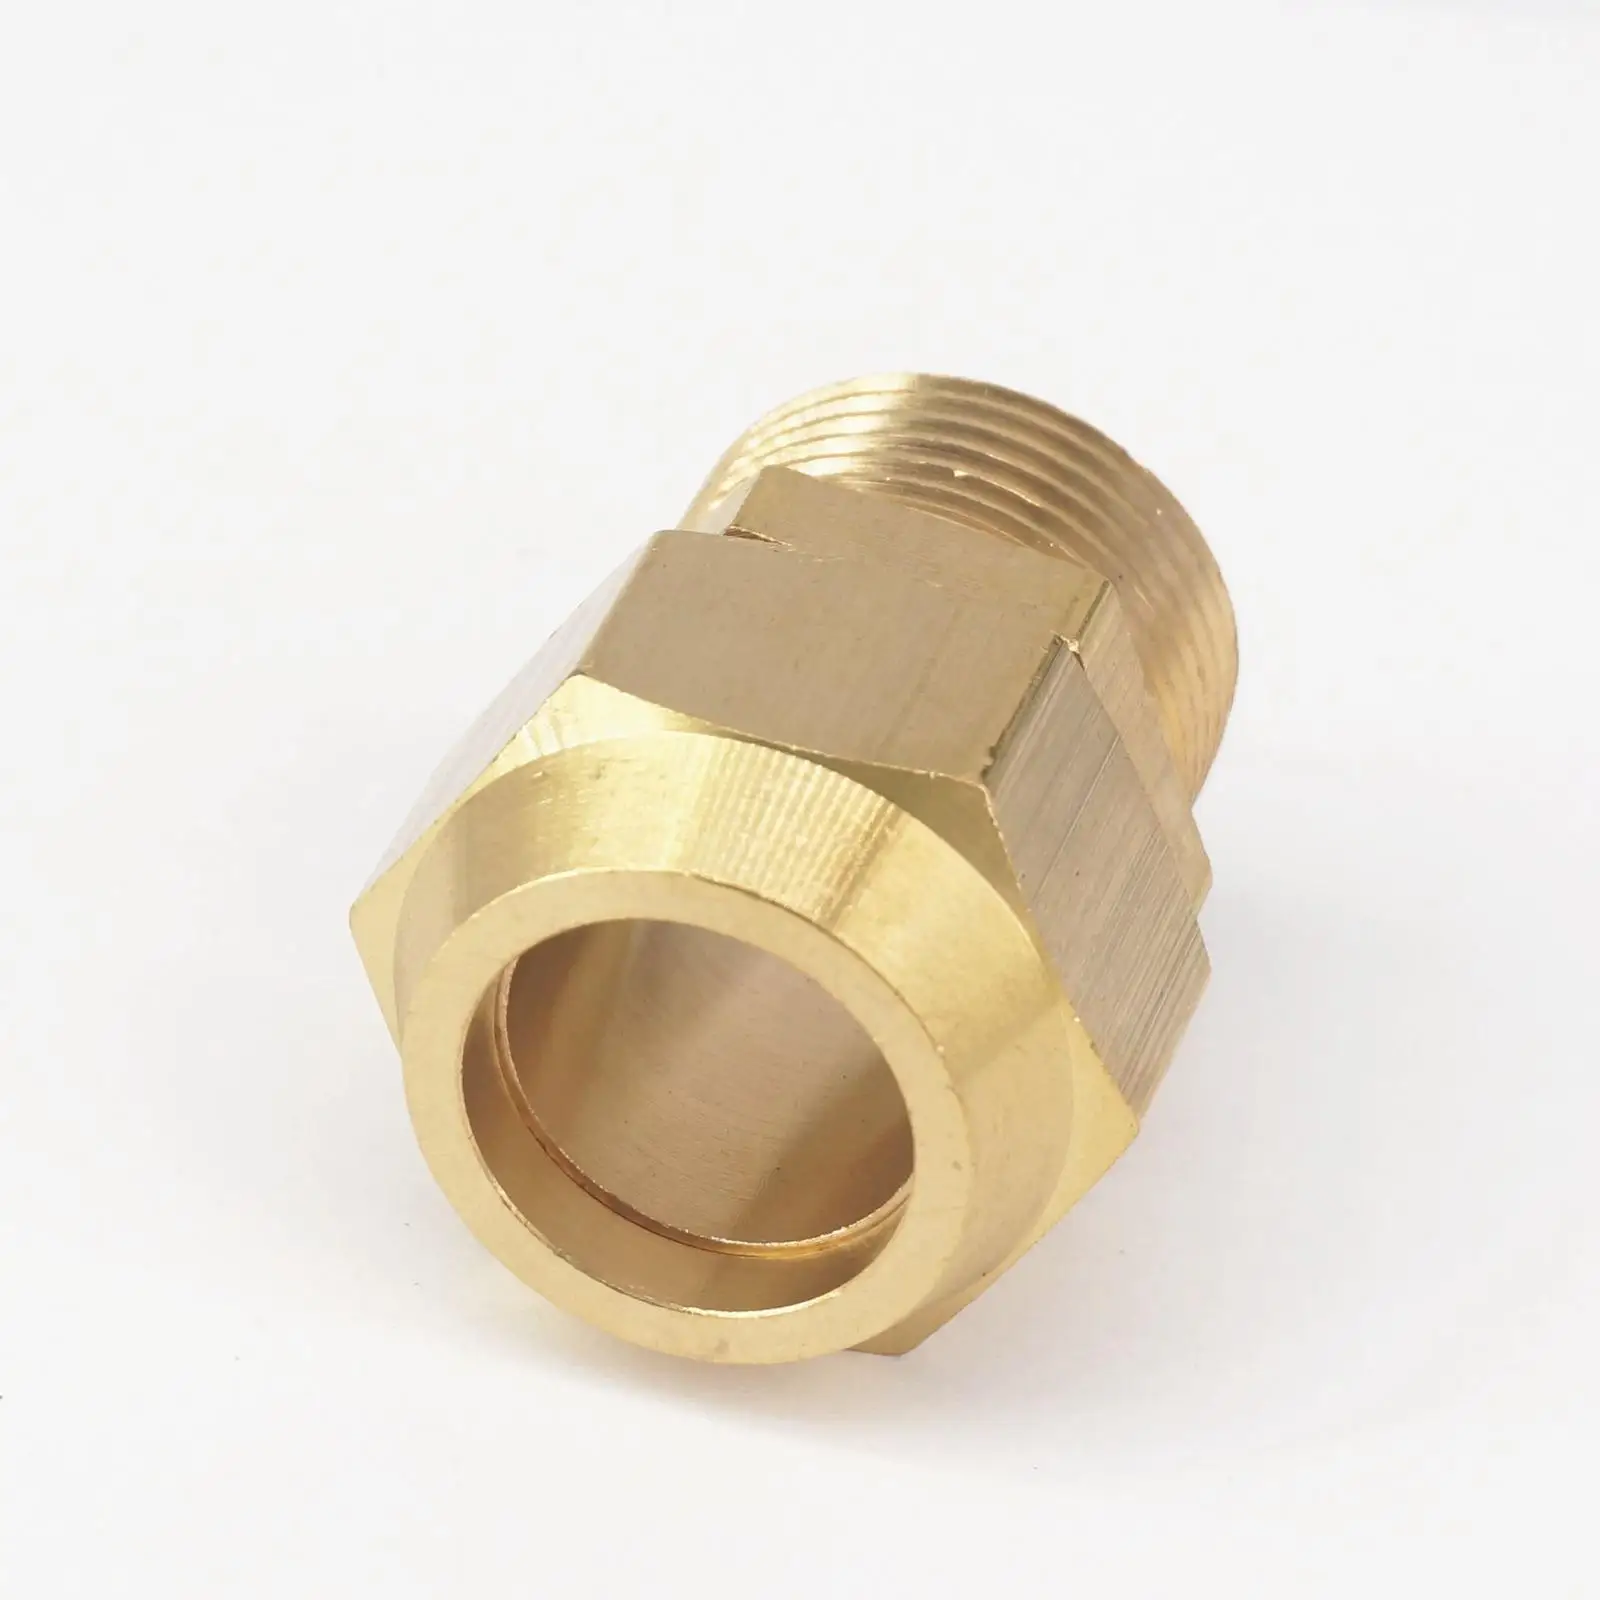 Flare Tube OD 6-19mm x 1/8"-1/2" BSP Male Brass Pneumatic Fitting Wit Nut 